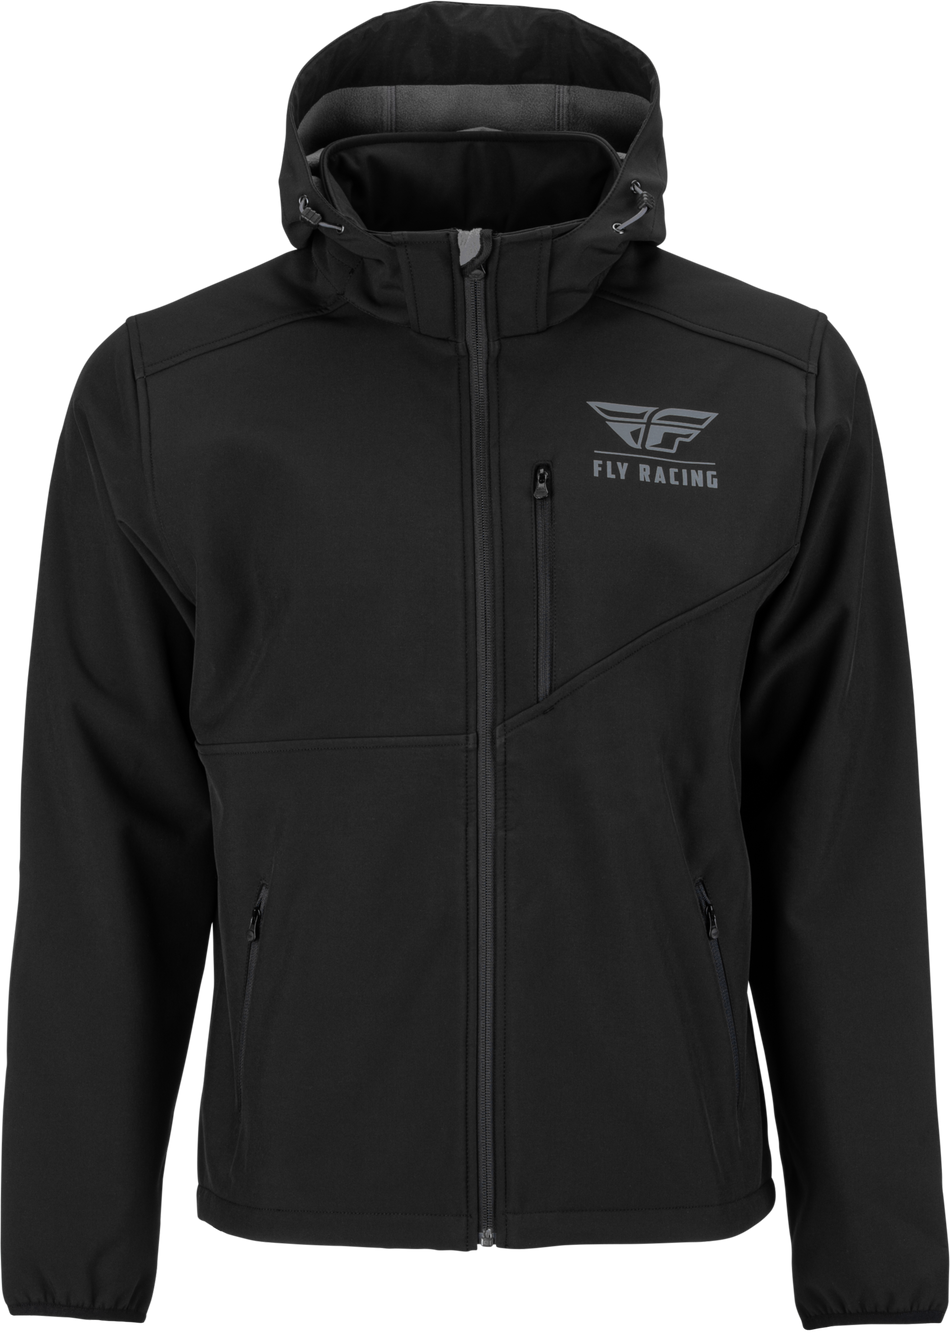 FLY RACING Checkpoint Jacket Black Xl 354-6383X